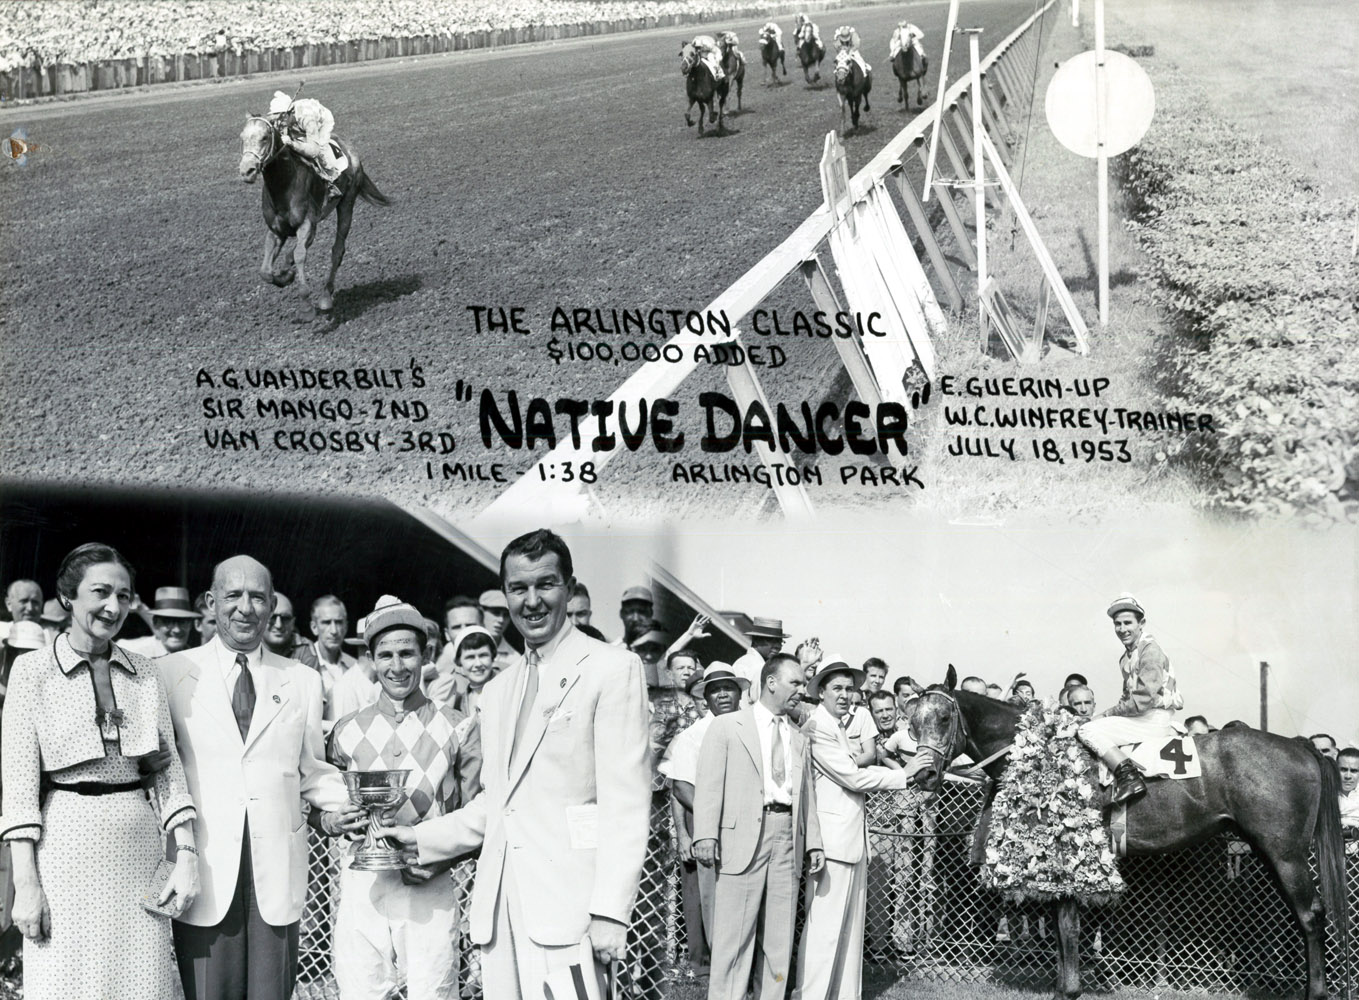 Win composite photograph for the 1953 Arlington Classic, won by Native Dancer with Eric Guerin up (Museum Collection)